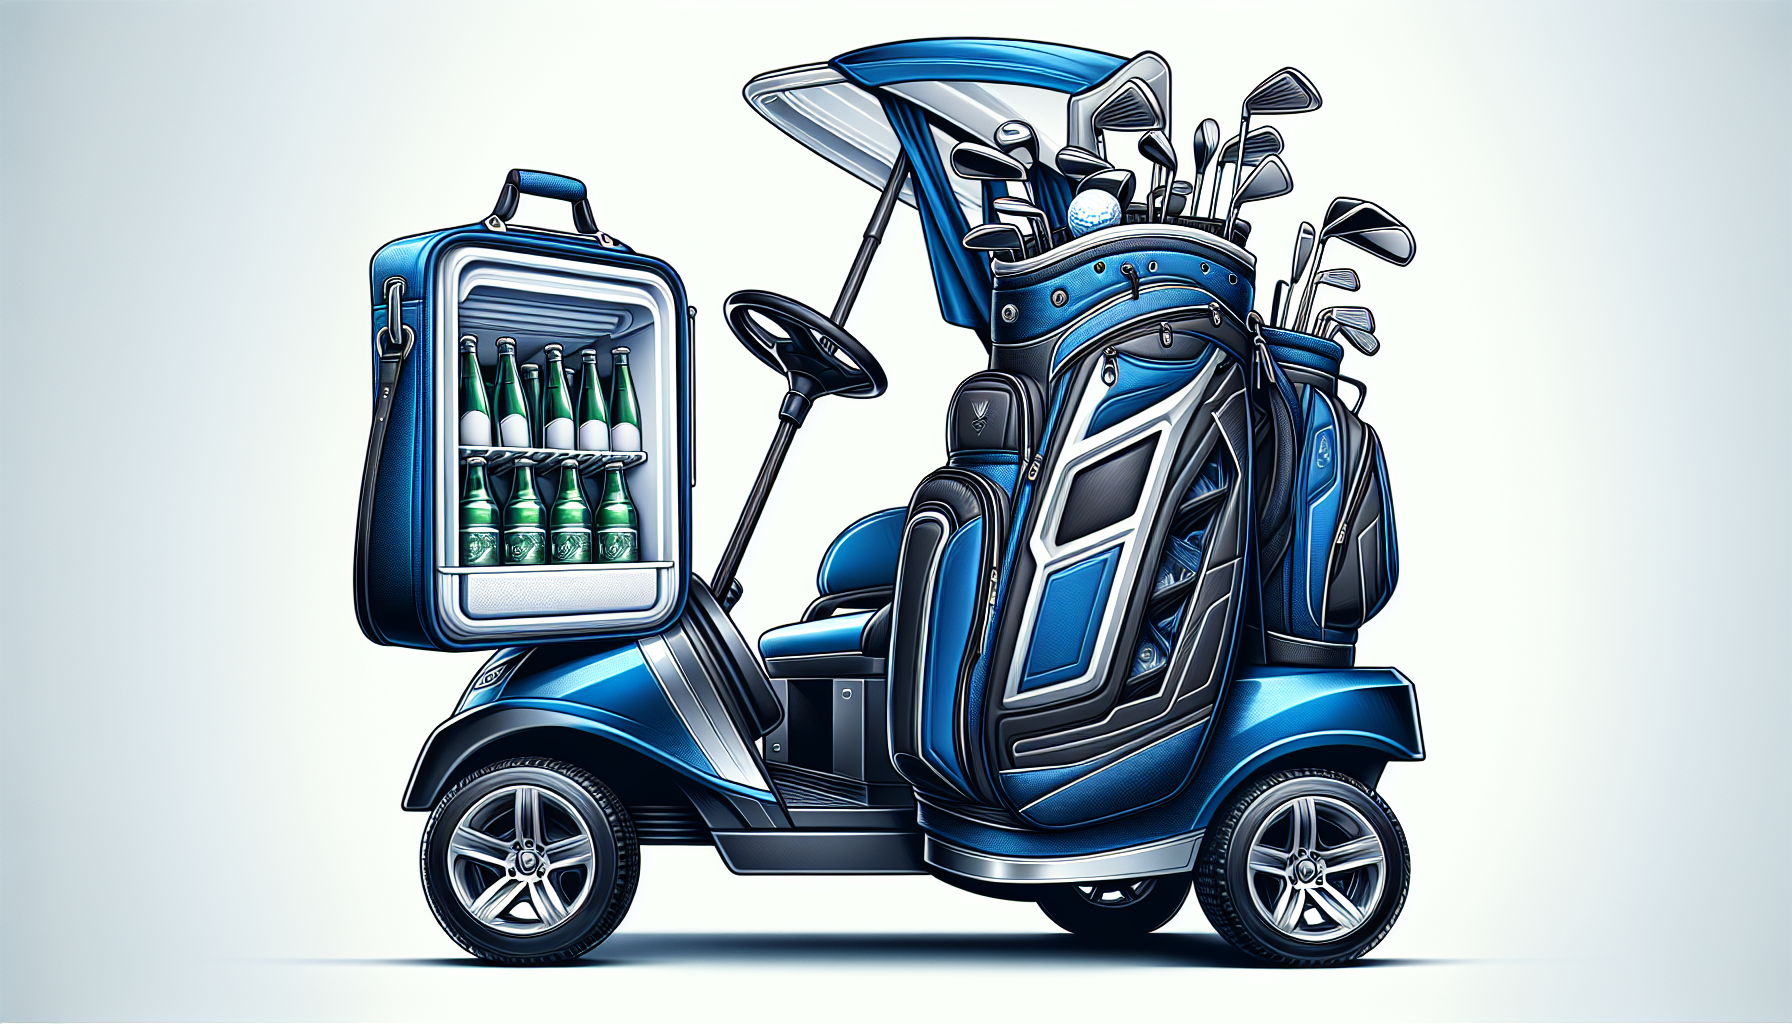 Cart rider-friendly golf bag with cooler